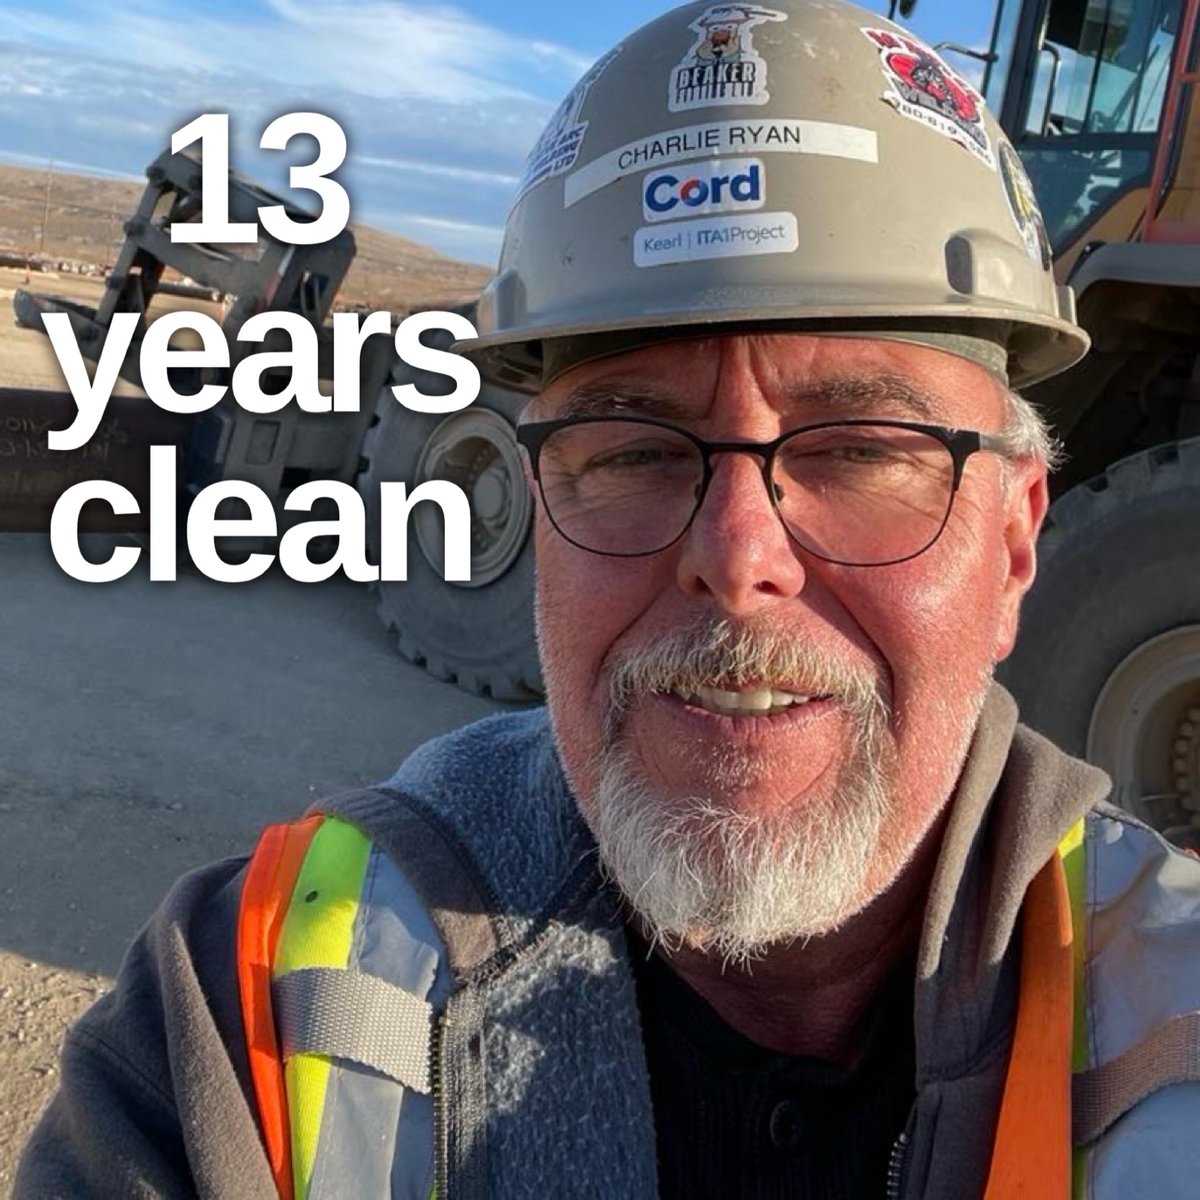 Congratulations Alumni Charlie on your 13 years clean! It’s great seeing you become a productive member of society !! Enjoy the gifts of recovery. #WeDoRecover #RecoveryWorks #NewWestRecovery